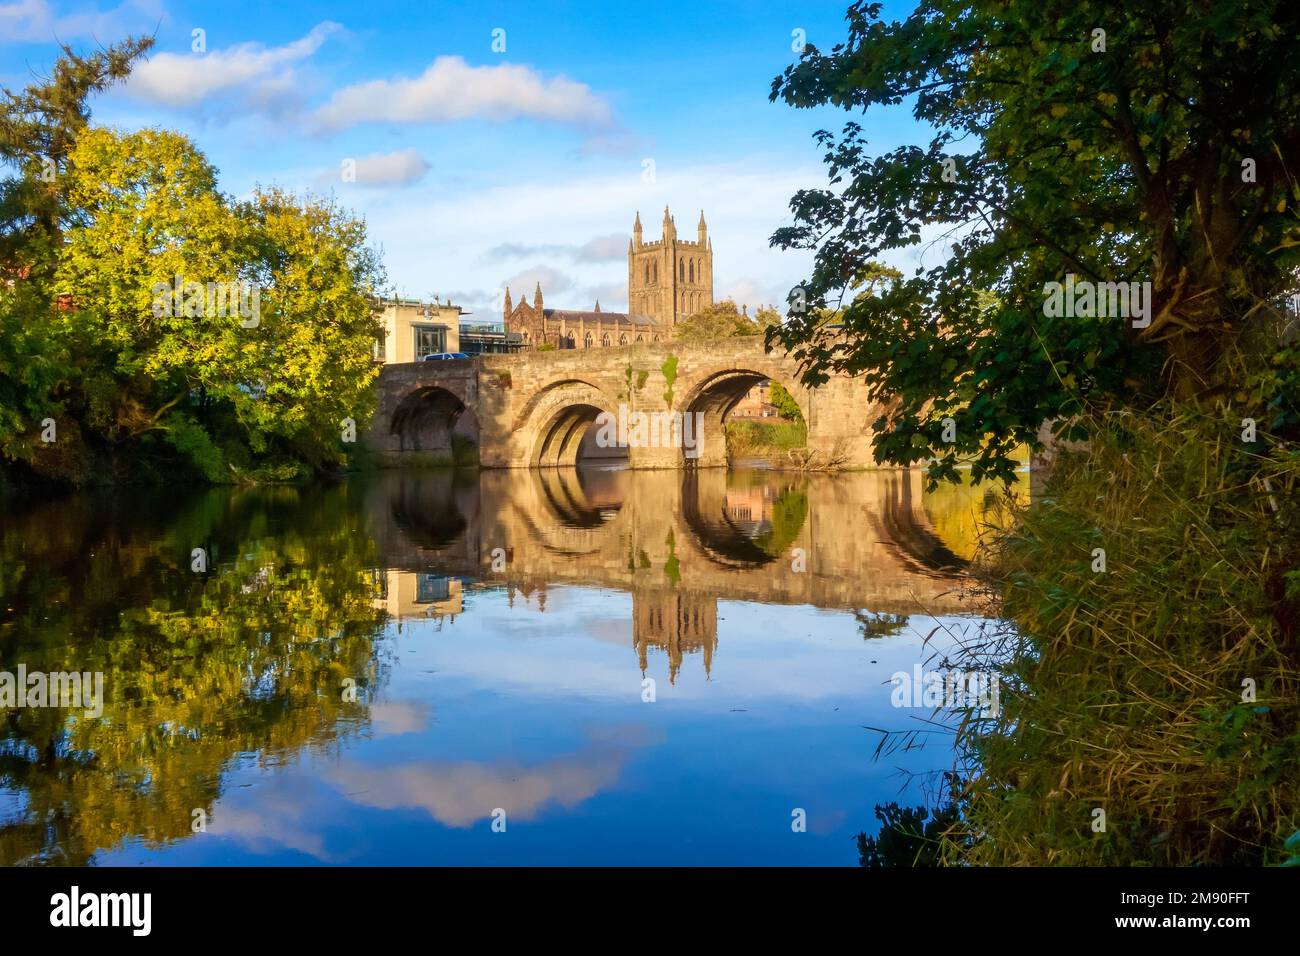 The Old Bridge constructed in 1490 spanning the river Wye at Hereford, with the 11th century Cathedral in the backgroung. Herefordshire UK. October 20 Stock Photo